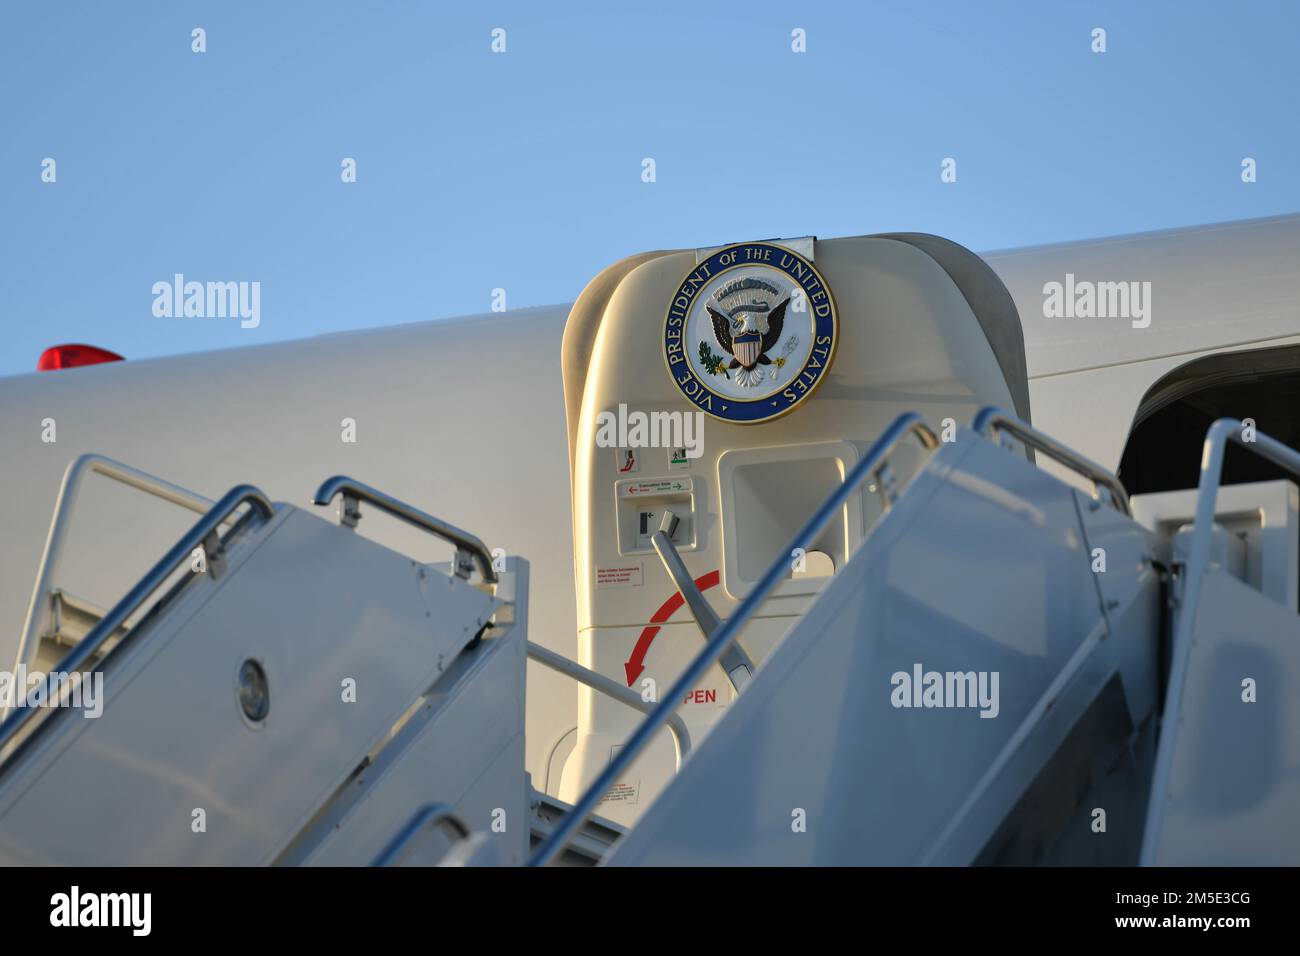 The Seal of the Vice President of the United States adorns one of the doors on Air Force Two. Stock Photo